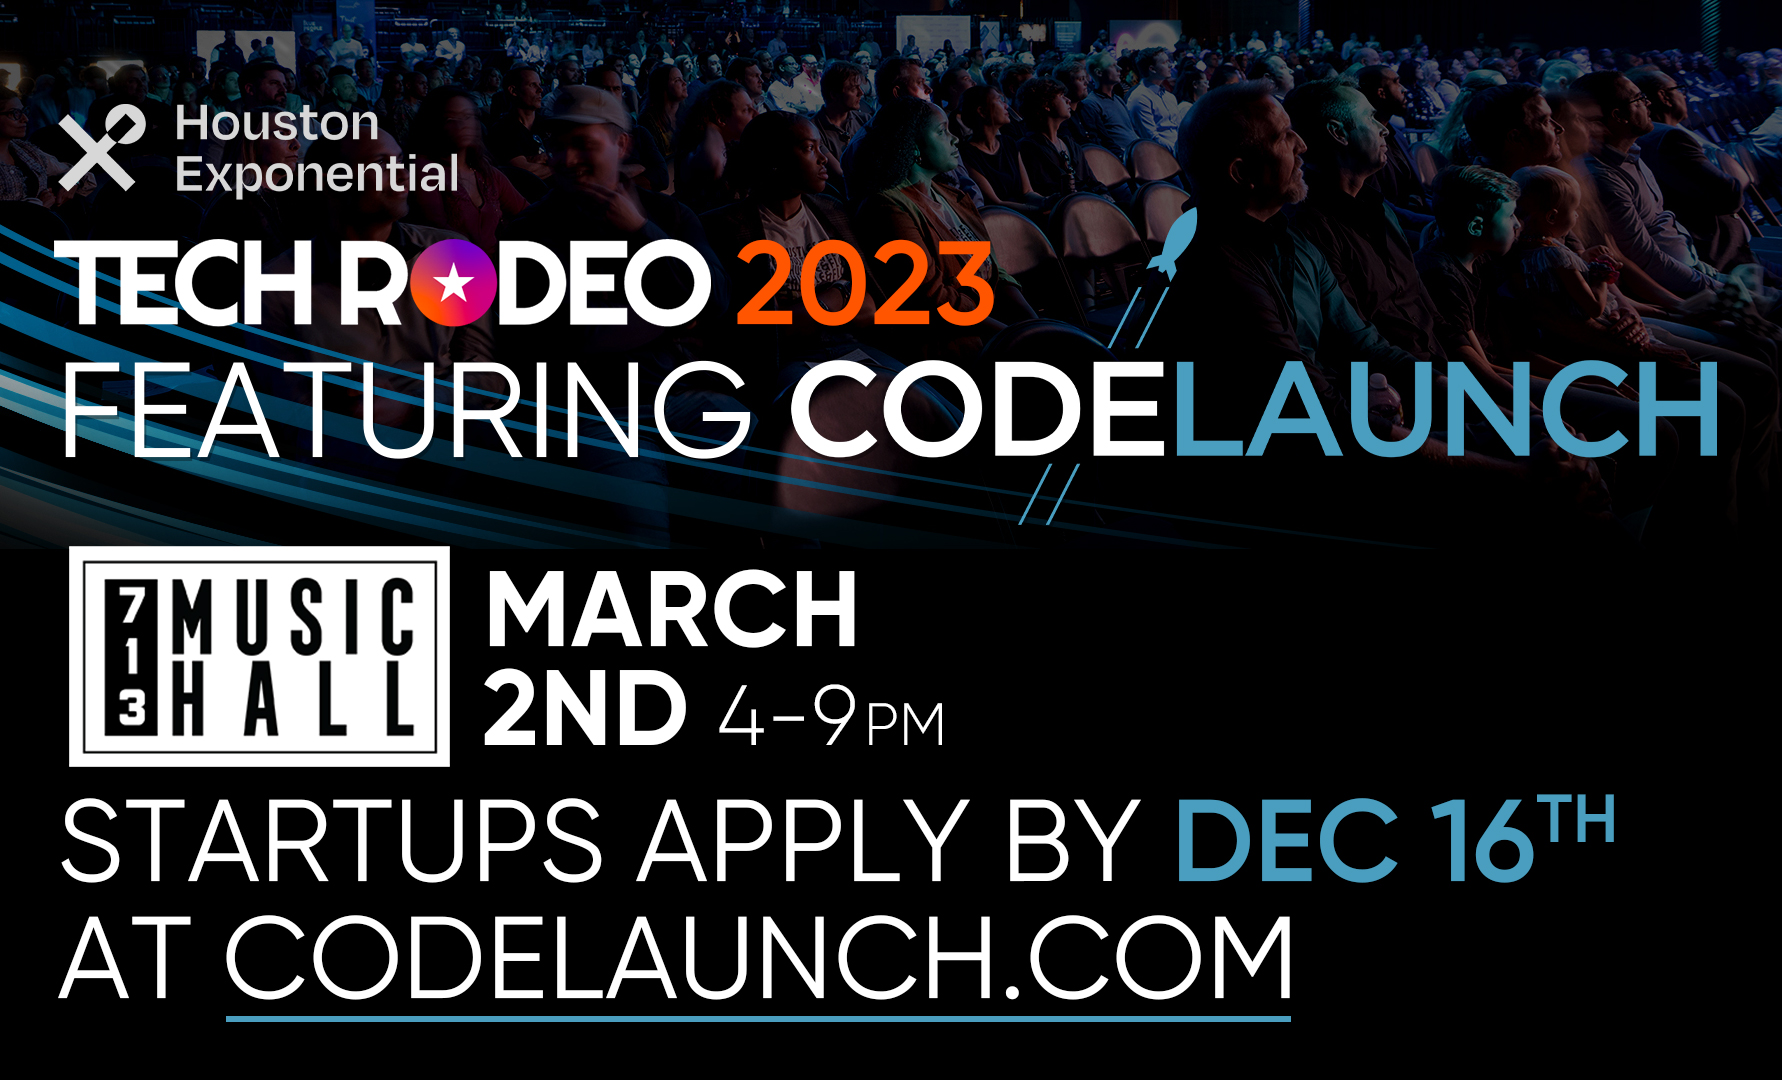 Tech Startup Founders: Here’s How You Can Be a Part of the 2nd Annual CodeLaunch Event in Houston, TX 